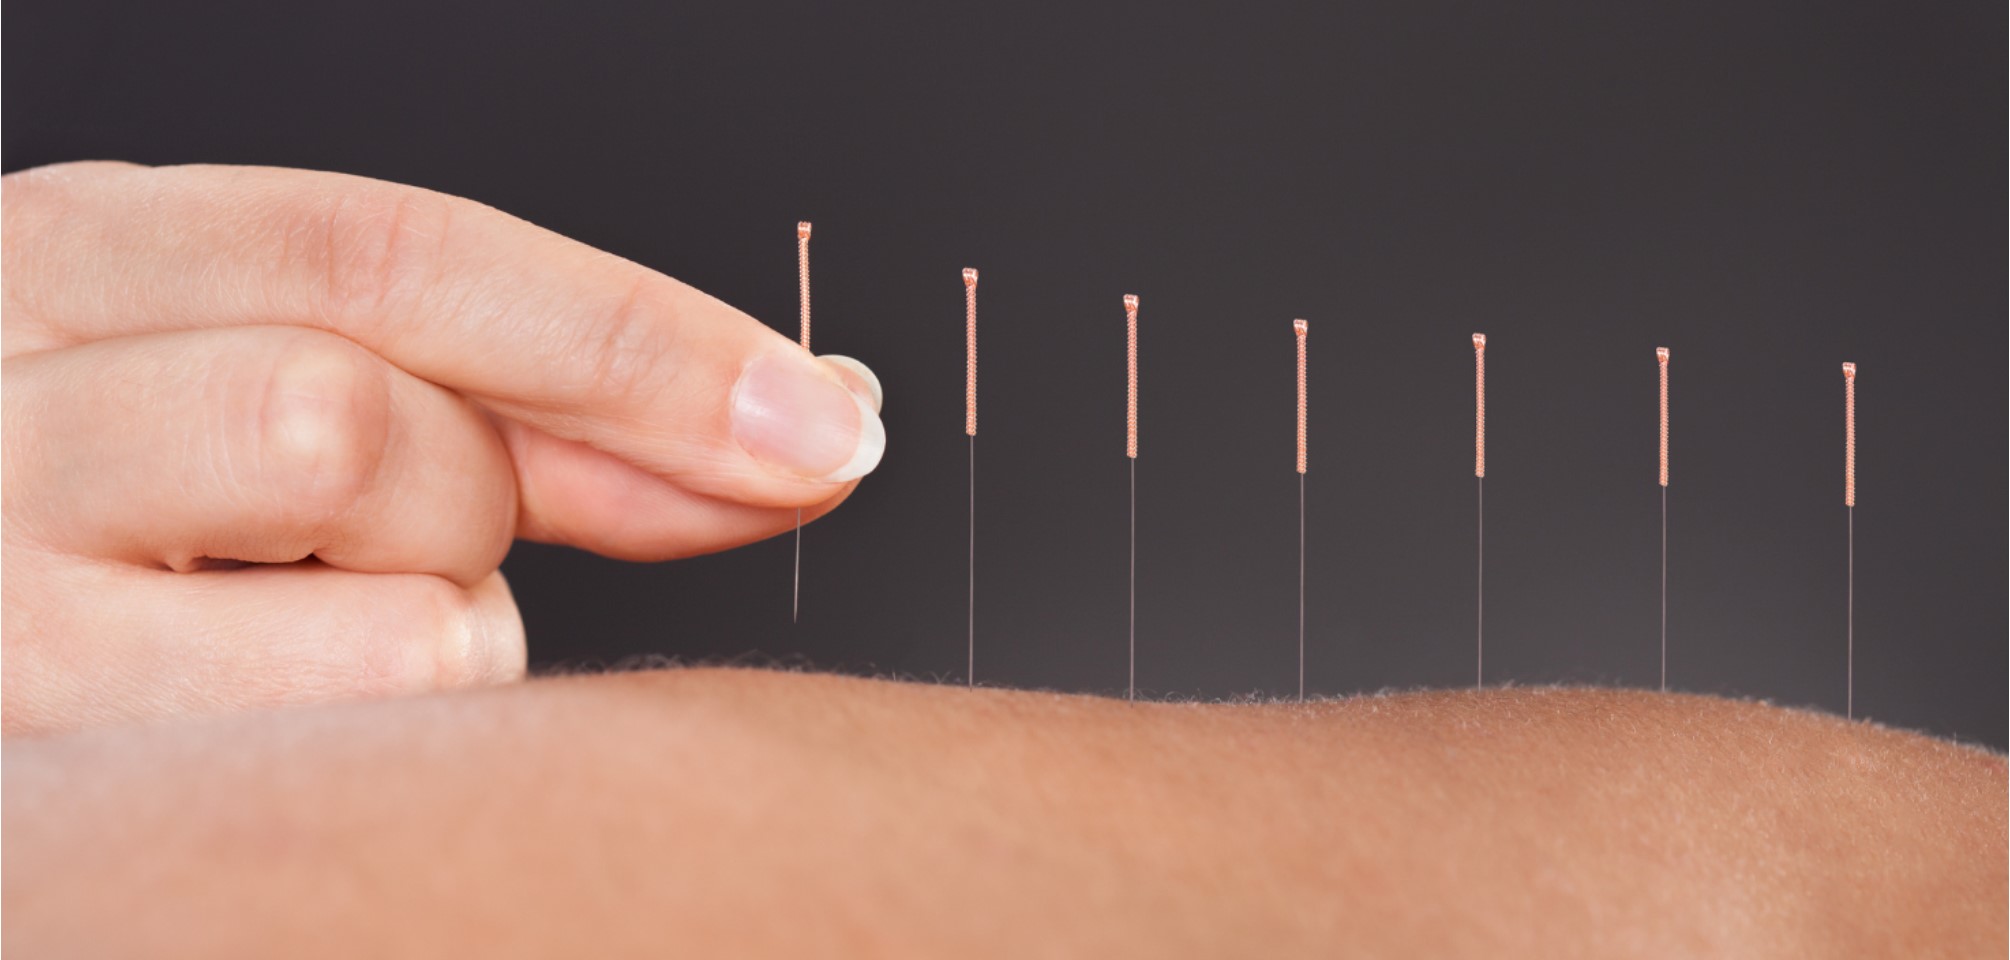 close up of a hand placing acupuncture needles along someones back